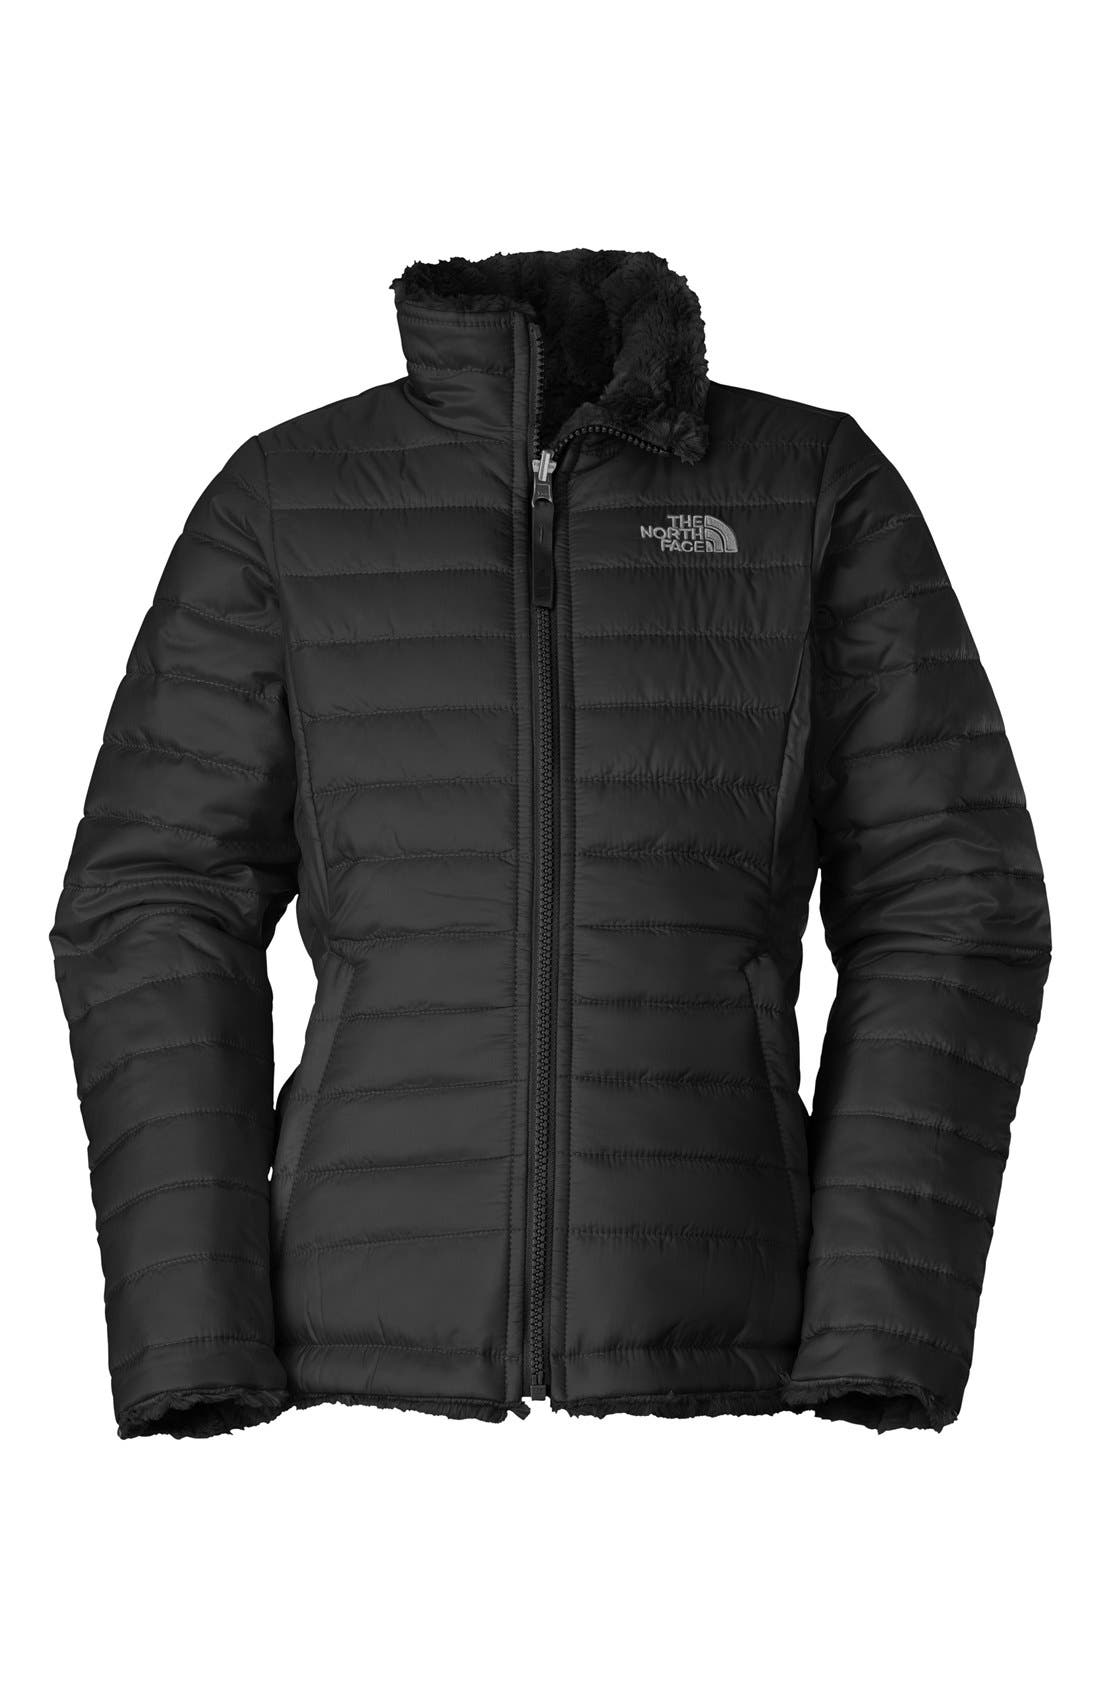 Girls' The North Face Coats, Jackets 